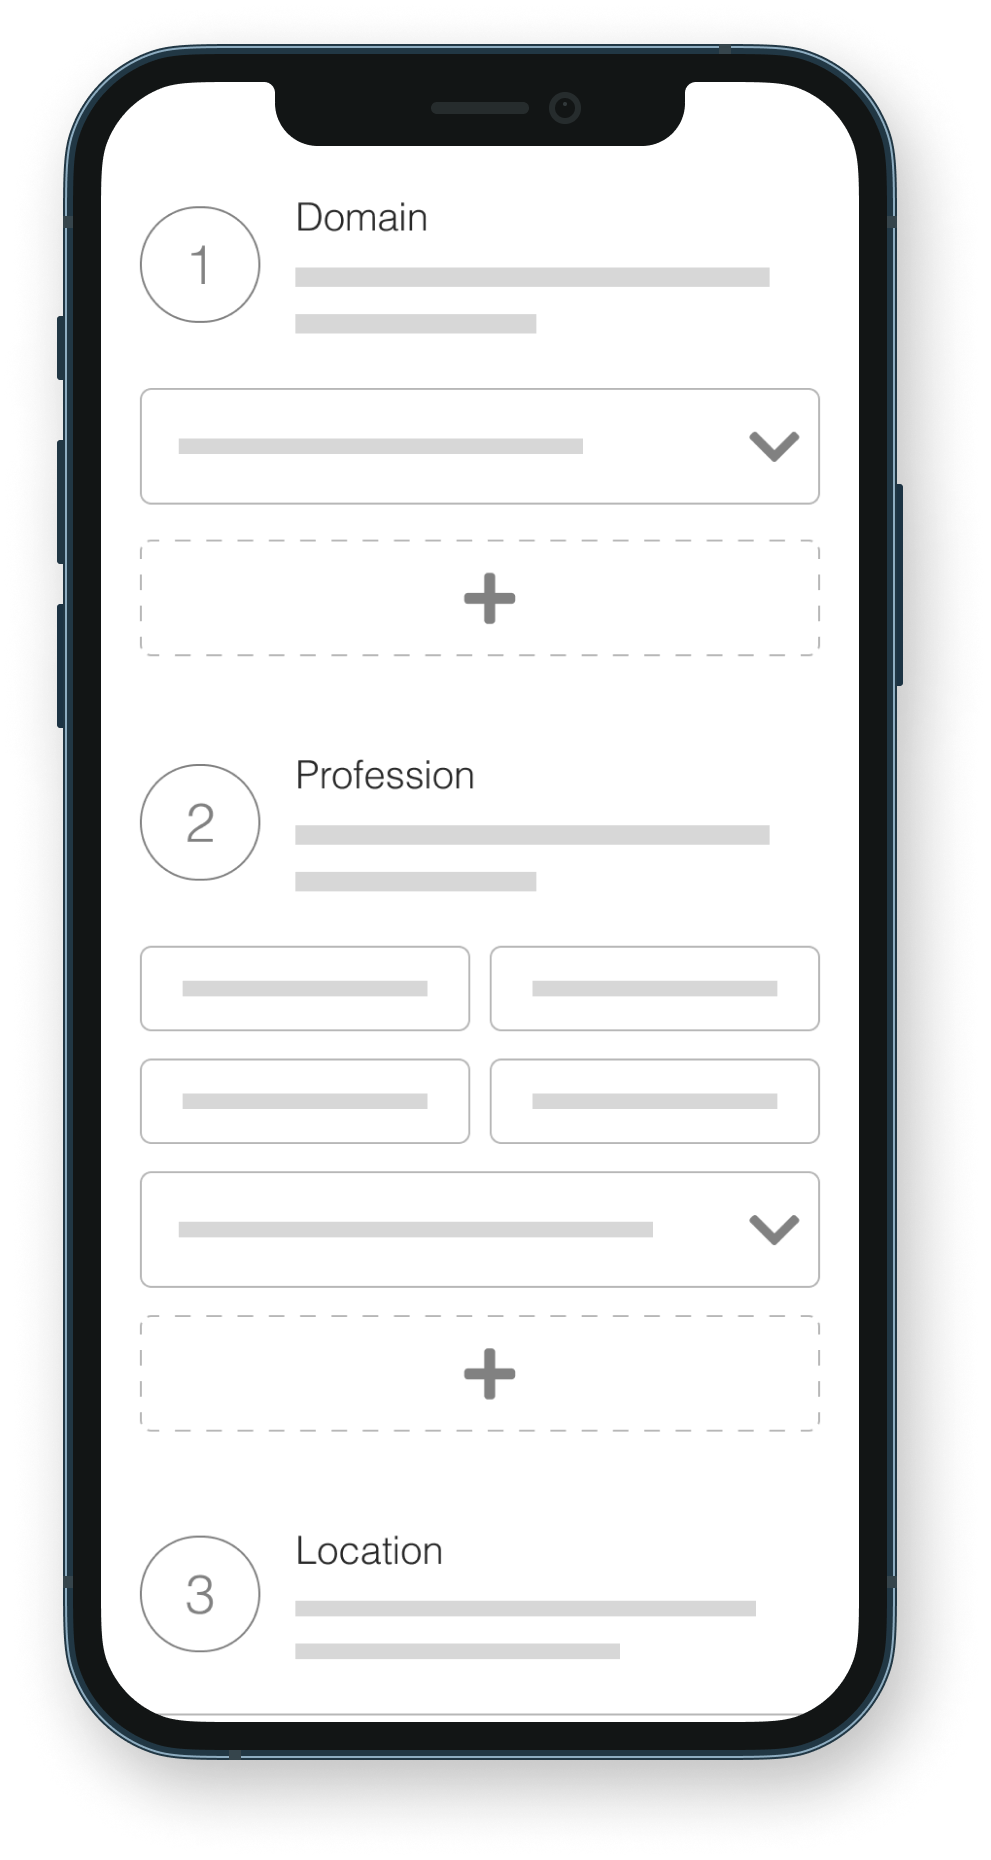 Preview of the low-fidelity app design in the device frame